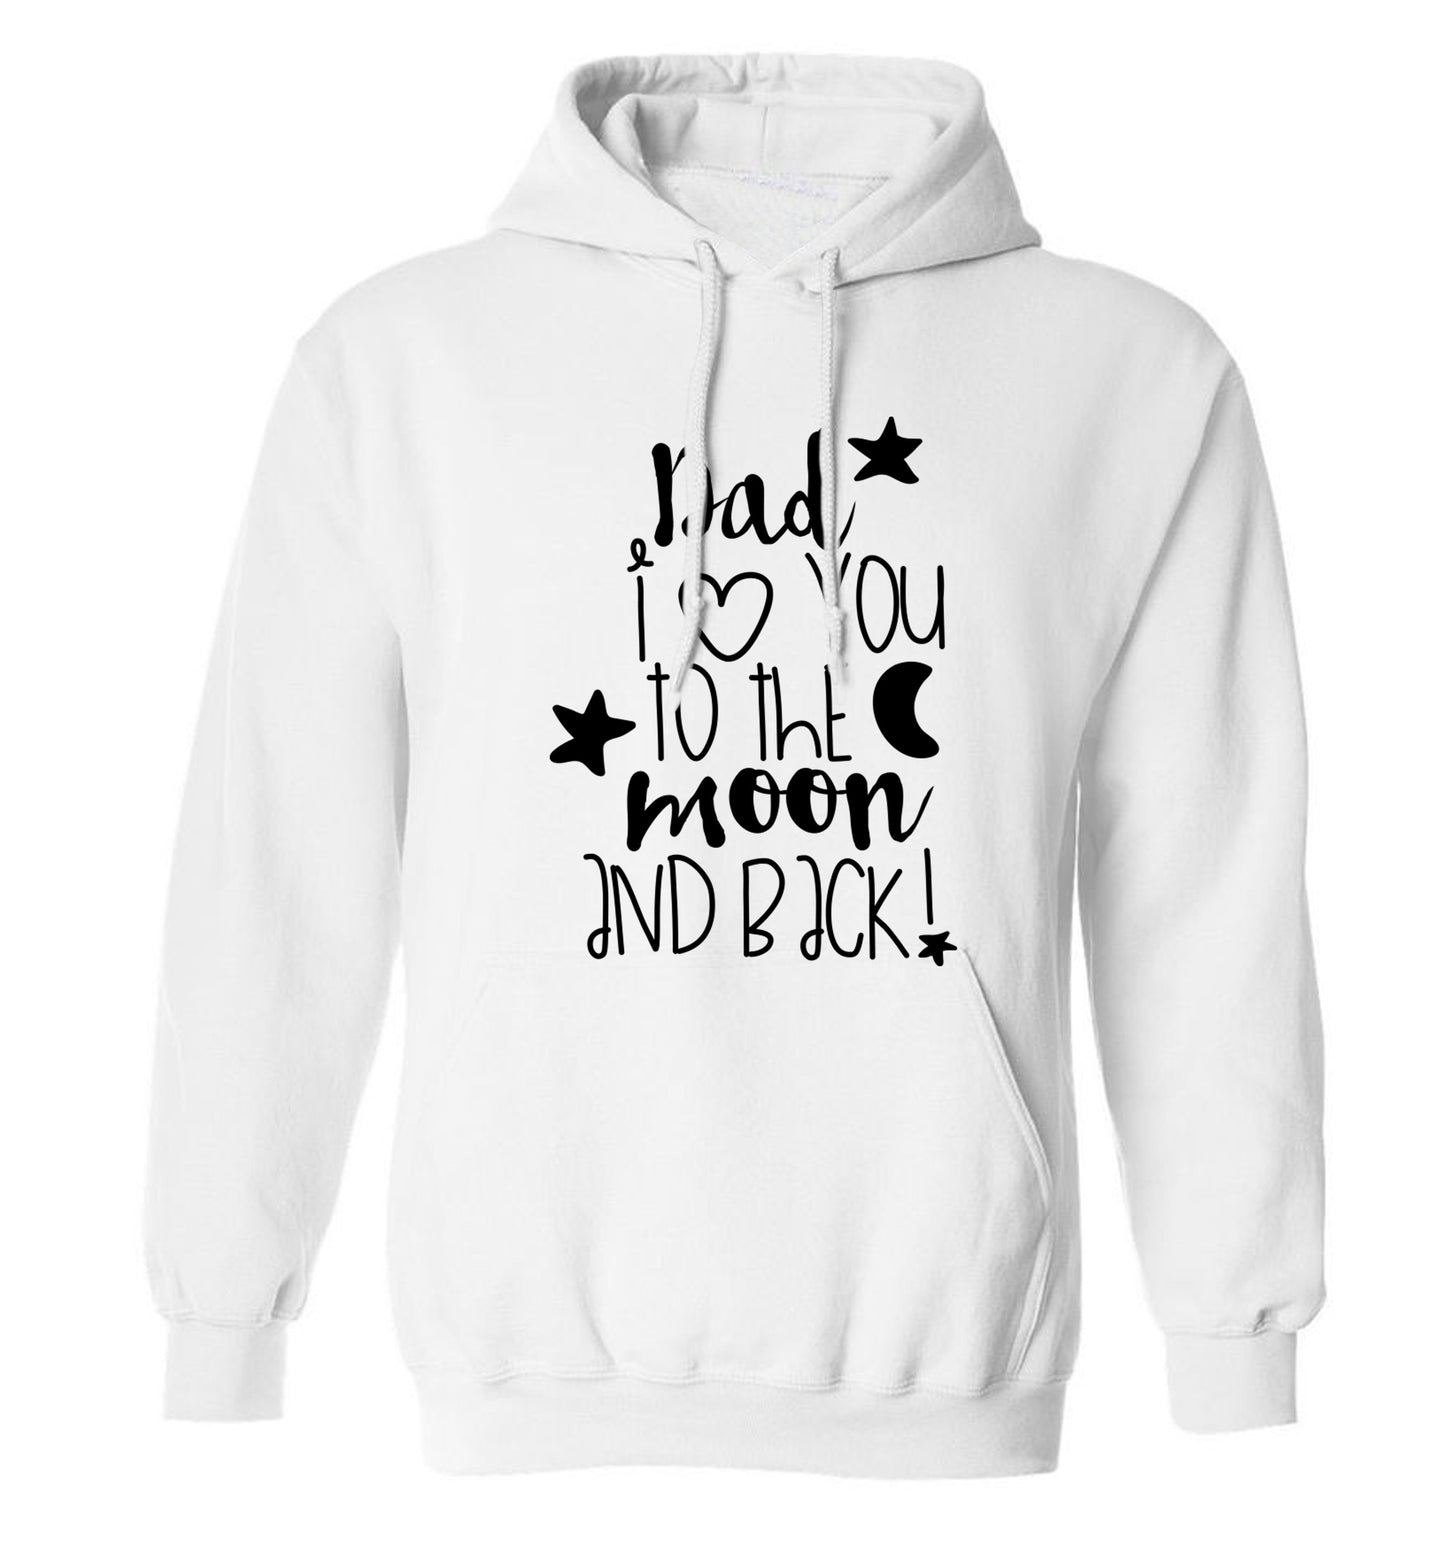 Dad I love you to the moon and back adults unisex white hoodie 2XL